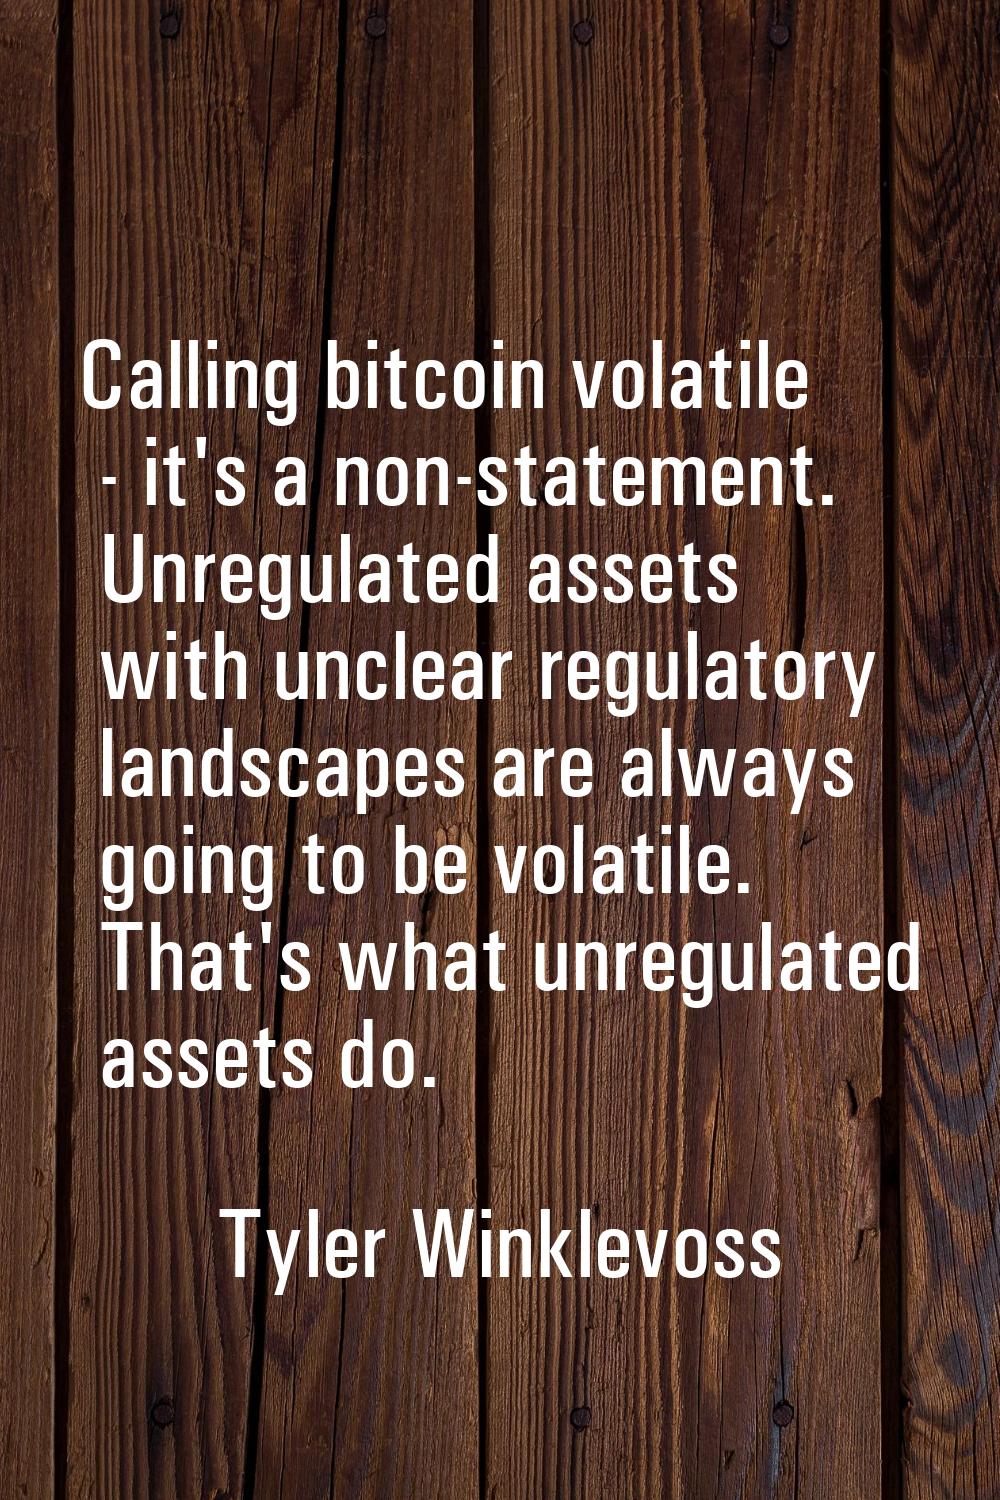 Calling bitcoin volatile - it's a non-statement. Unregulated assets with unclear regulatory landsca